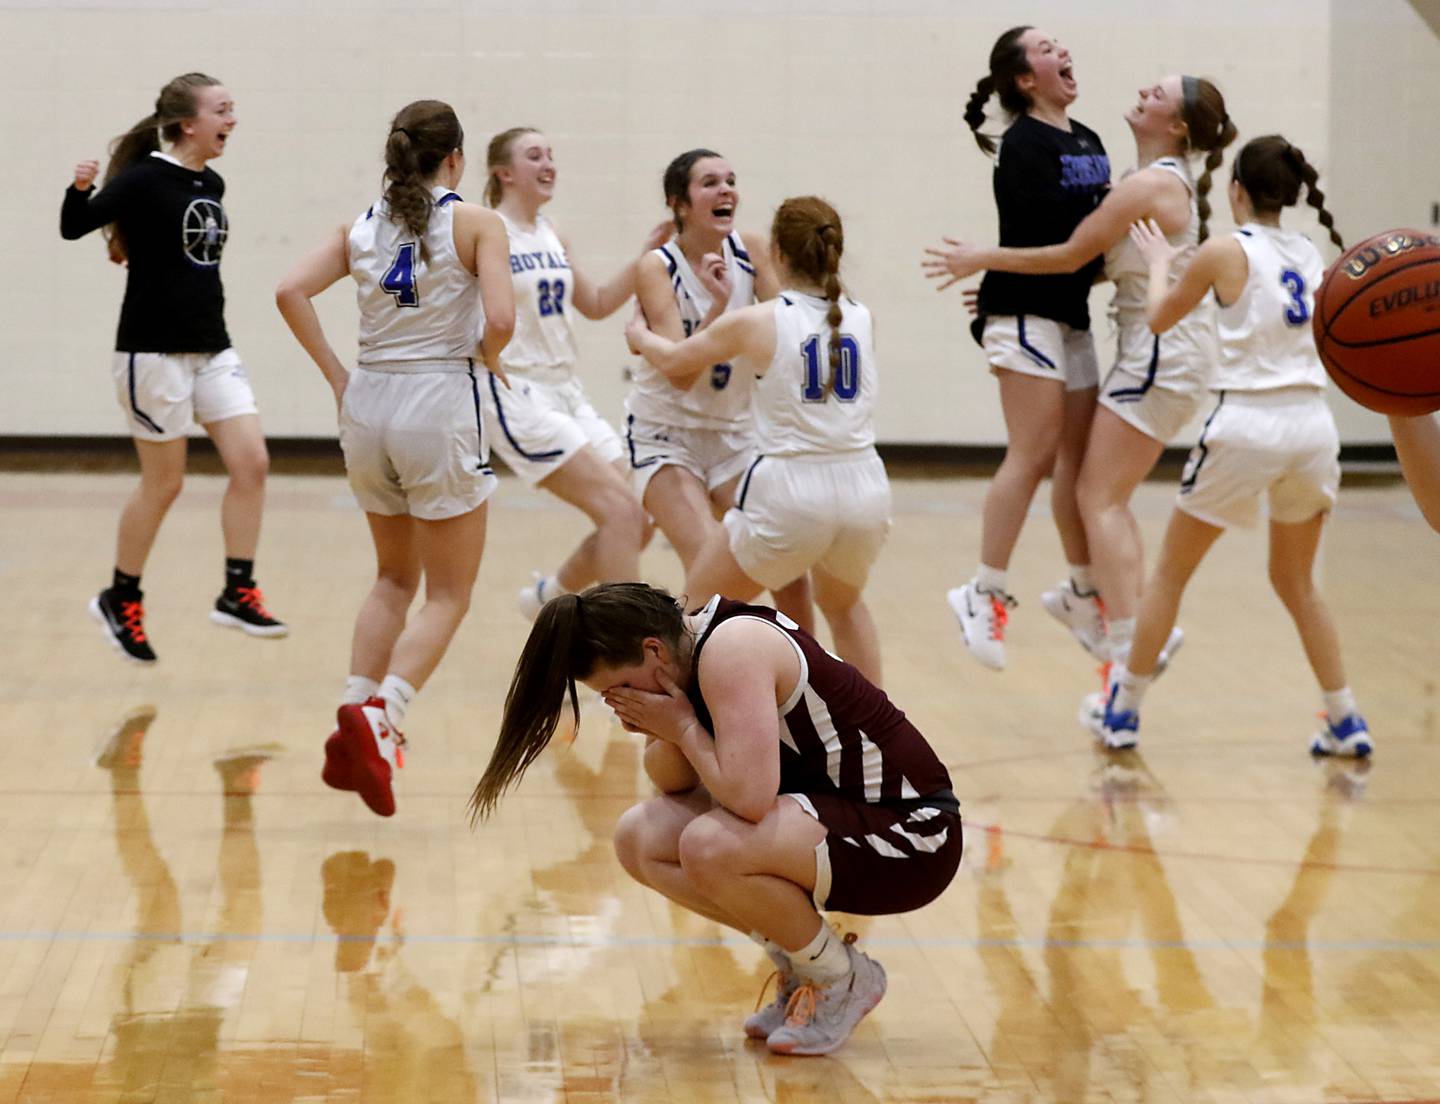 Marengo’s Addie Johnson reacts to the loss as Rosary players celebrate their one-point overtime win over Marengo during a IHSA Class 2A Regional semifinal basketball game Monday evening, Feb. 14, 2022, between Marengo and Rosary at Marian Central High School.